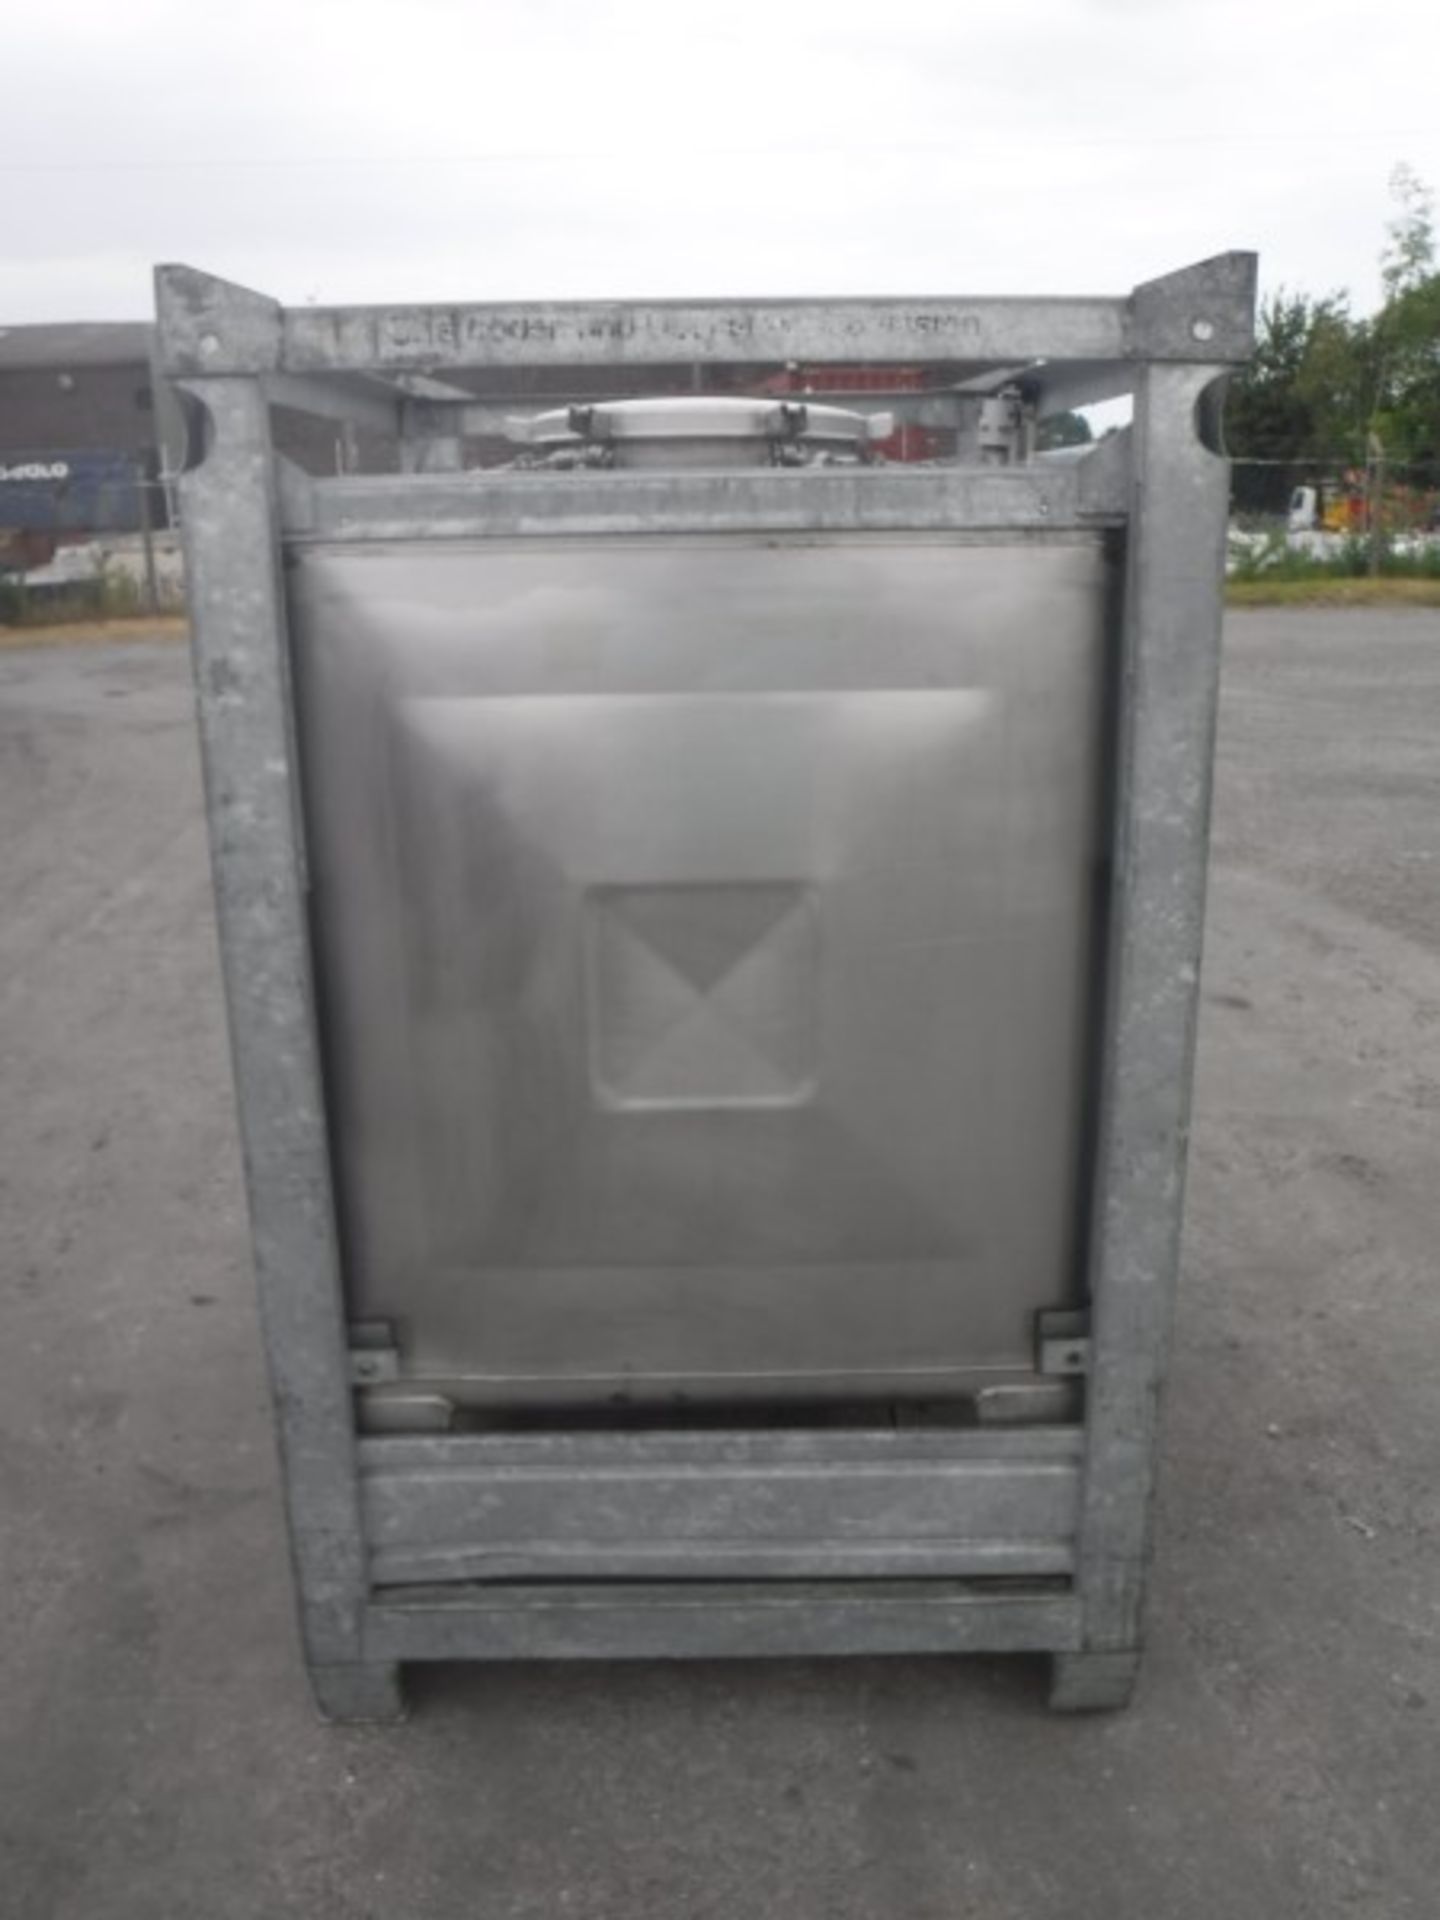 Stainless Steel IBC with Galvanised Protective Frame and Base (Frame can be removed if not neaded) - Image 3 of 8